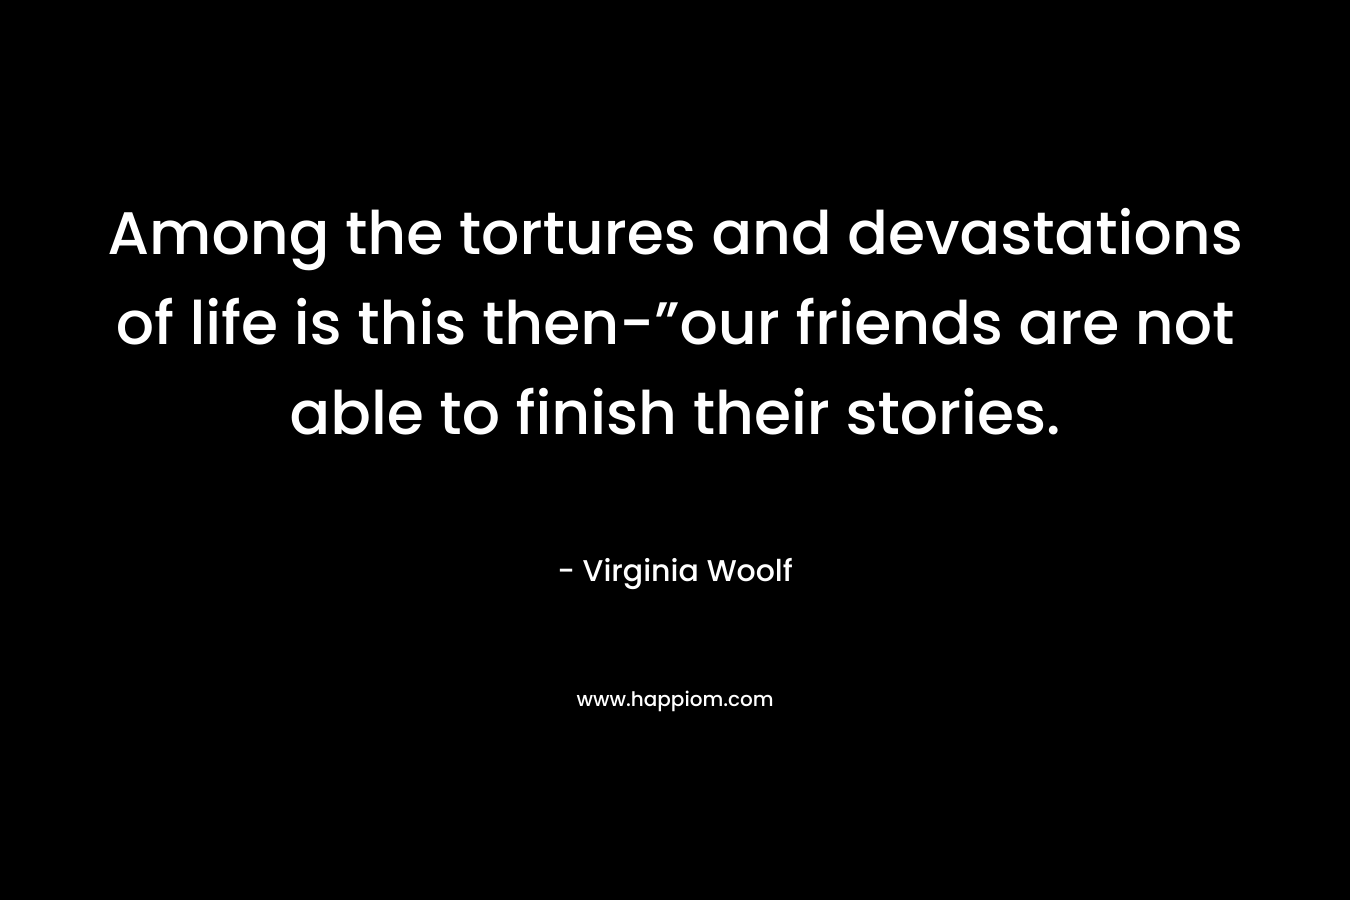 Among the tortures and devastations of life is this then-”our friends are not able to finish their stories. – Virginia Woolf